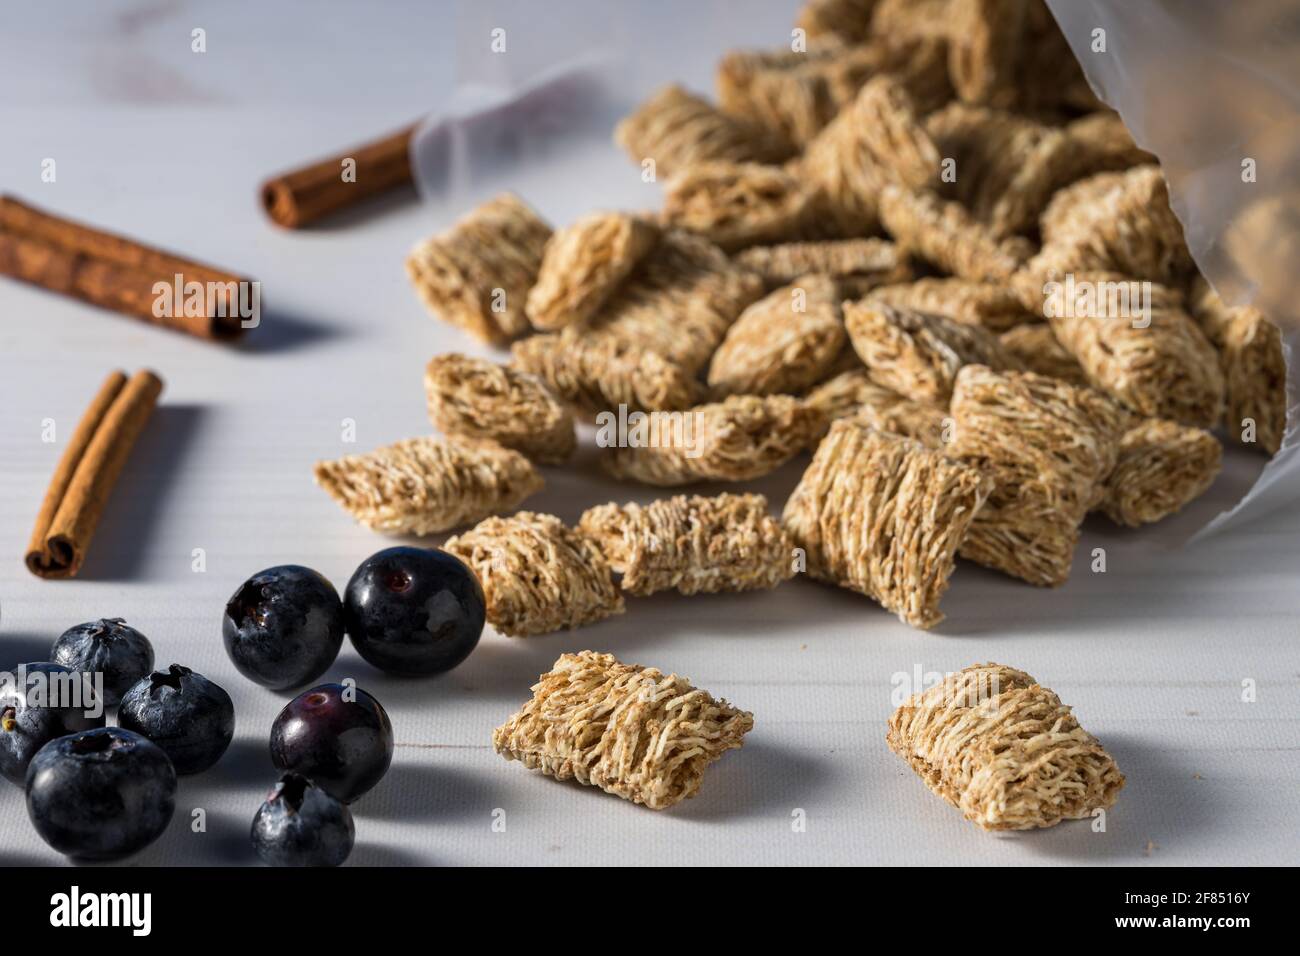 Shredded wheat biscuit Stock Photo